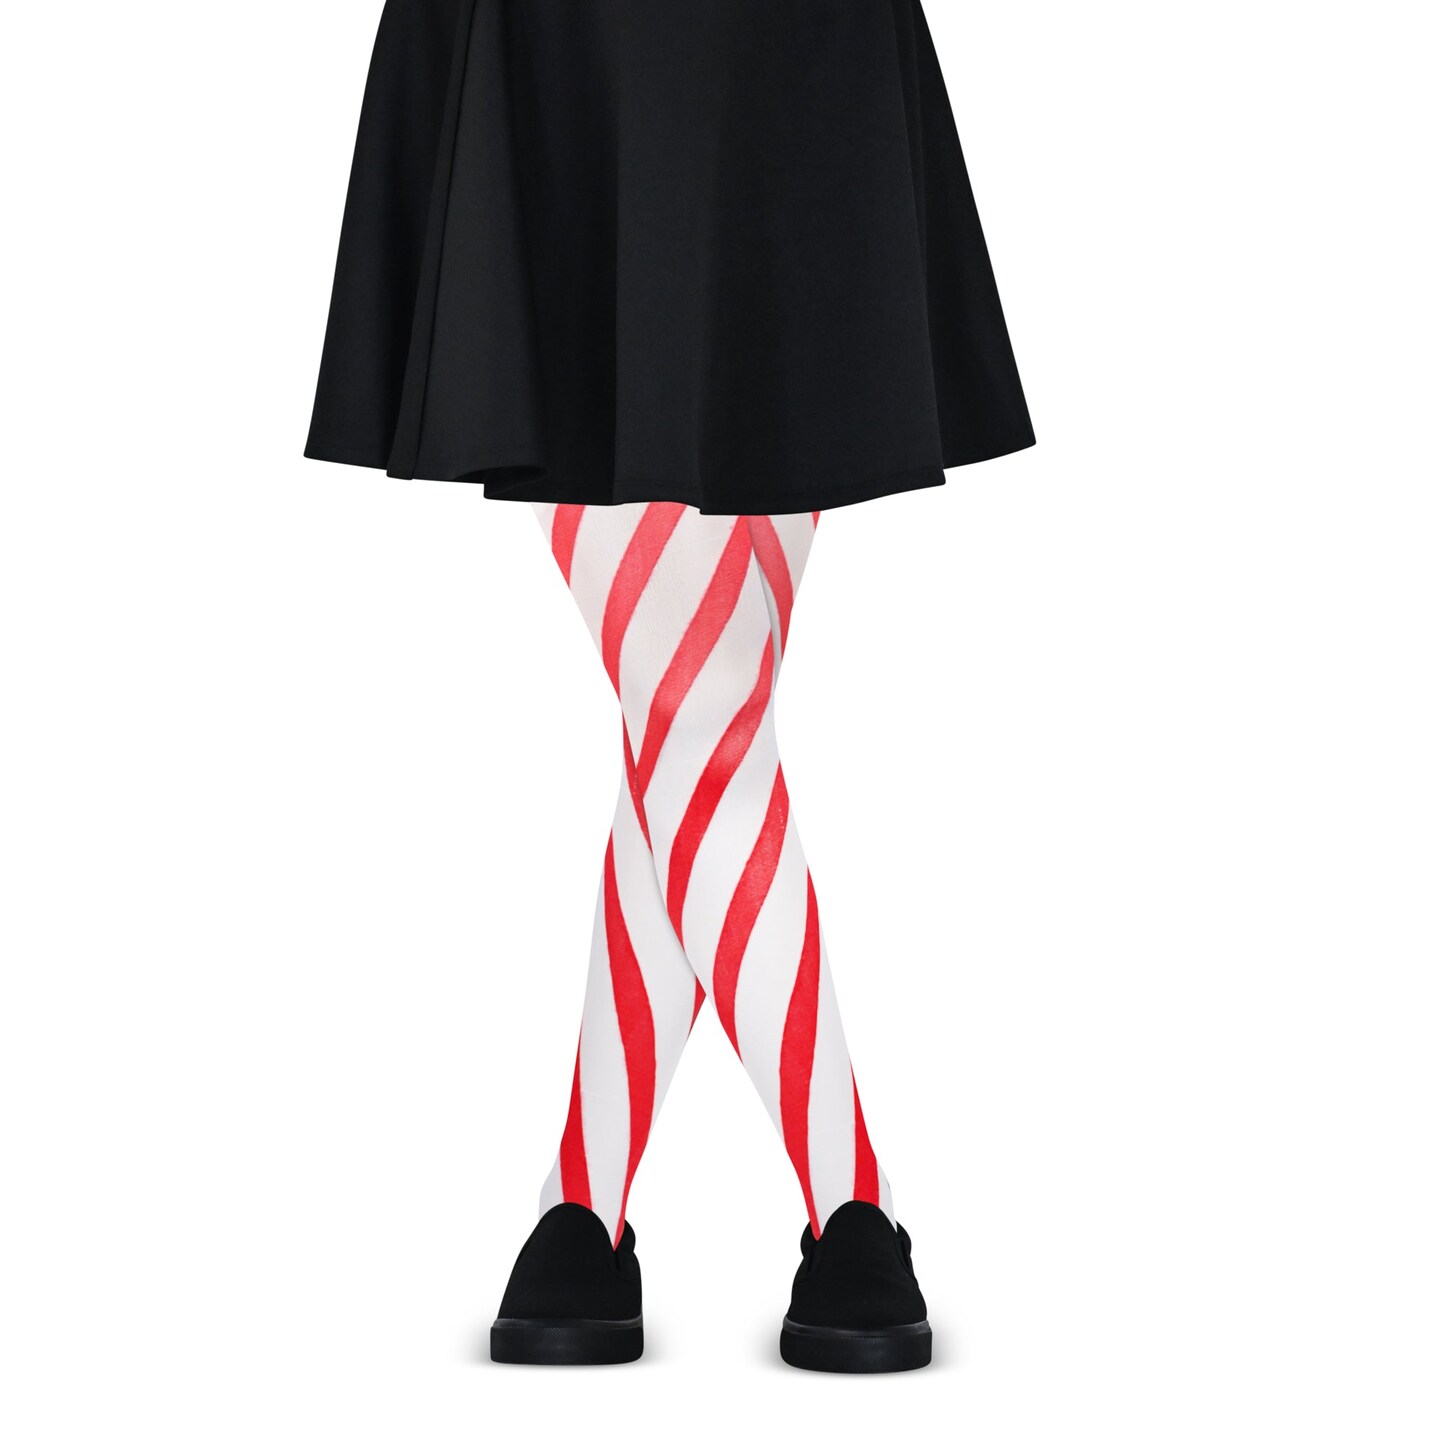 Candy Cane Striped Tights – Red and White Diagonally Striped Nylon Stretch  Pantyhose Stocking Accessories for Every Day Attire and Costumes for Teens  and Children's